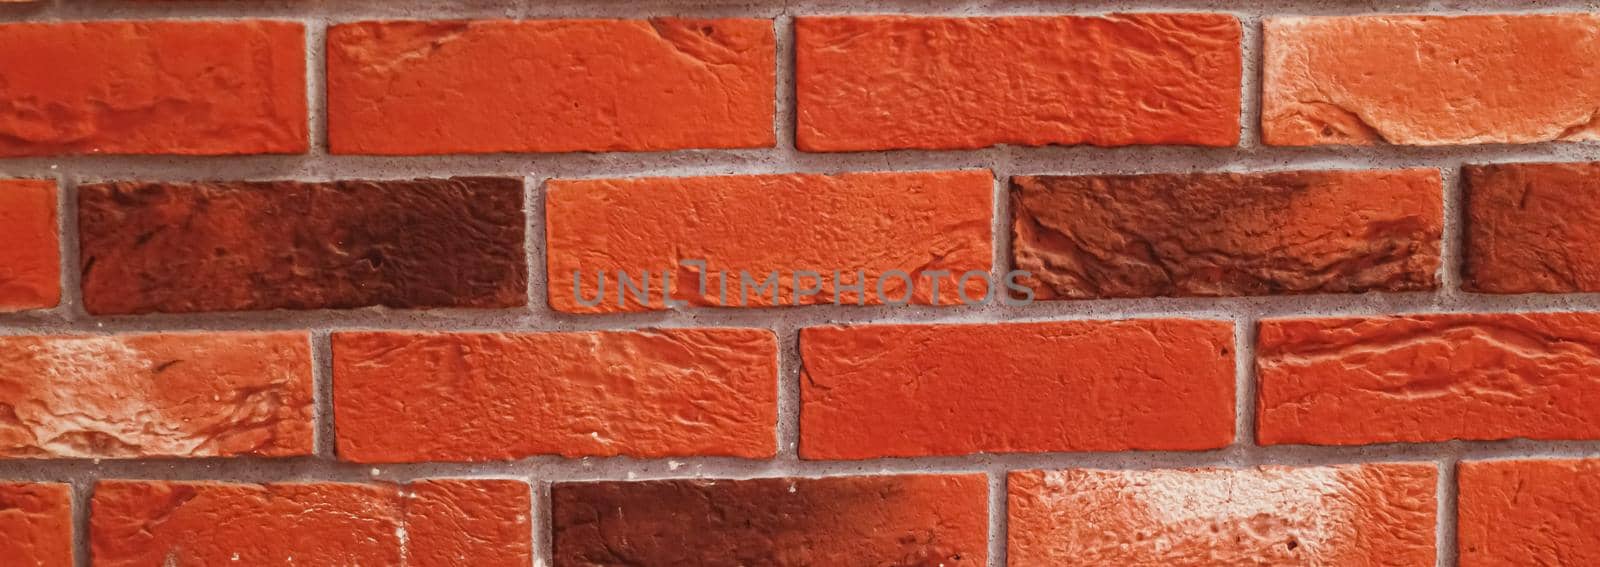 Red brick texture as surface background, interior design and exterior wall by Anneleven